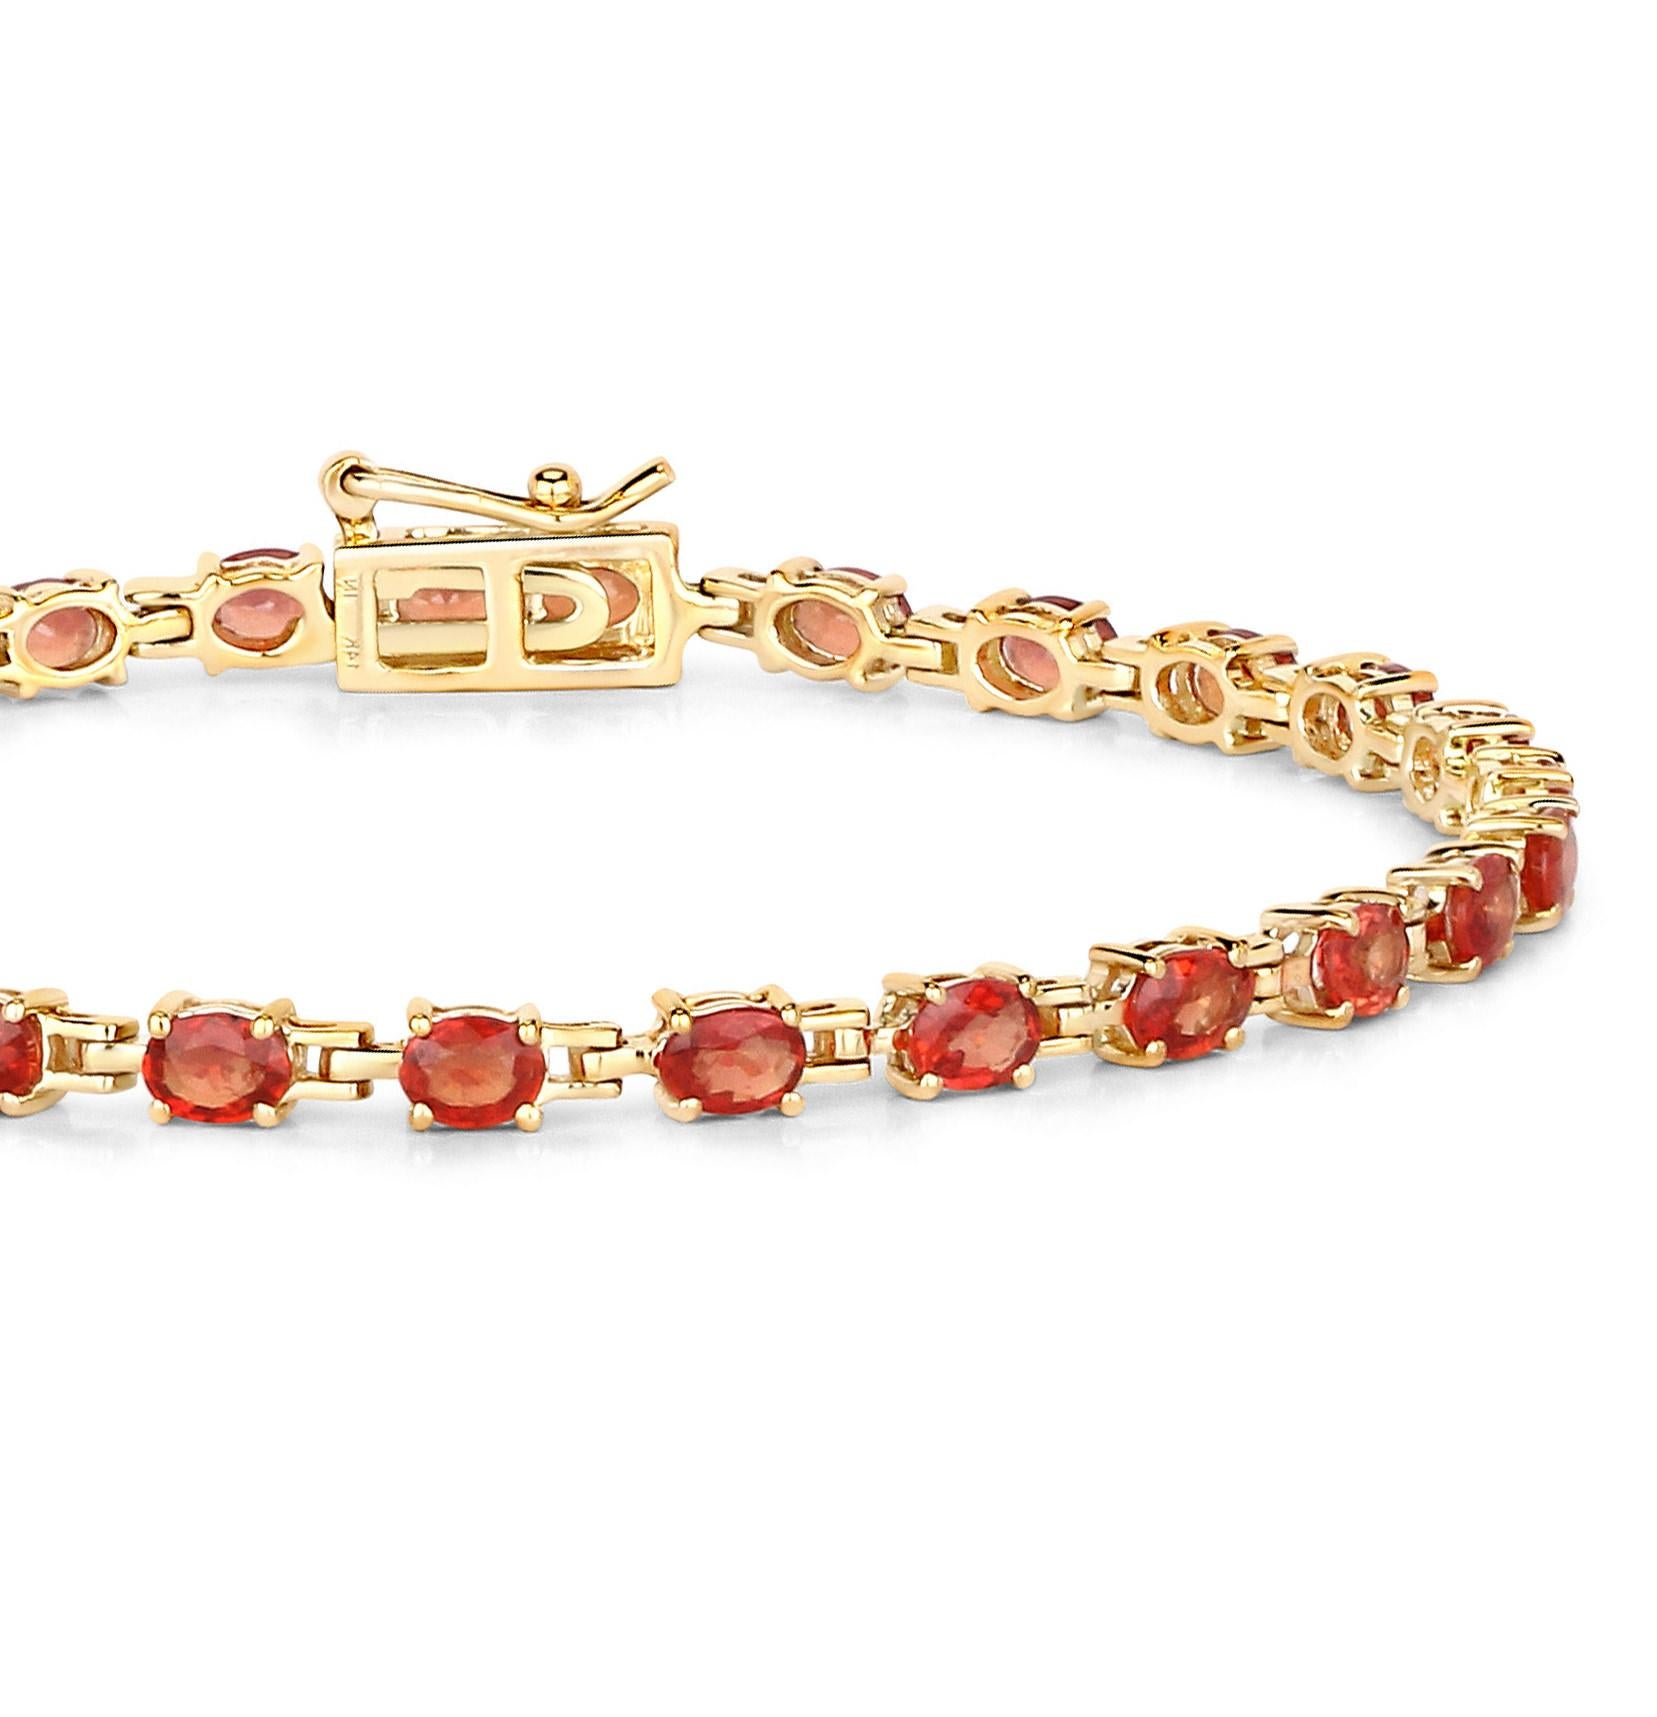 Stunning Natural Red Orange Sapphire Tennis Bracelet 7 Carats 14k Yellow Gold In Excellent Condition For Sale In Laguna Niguel, CA